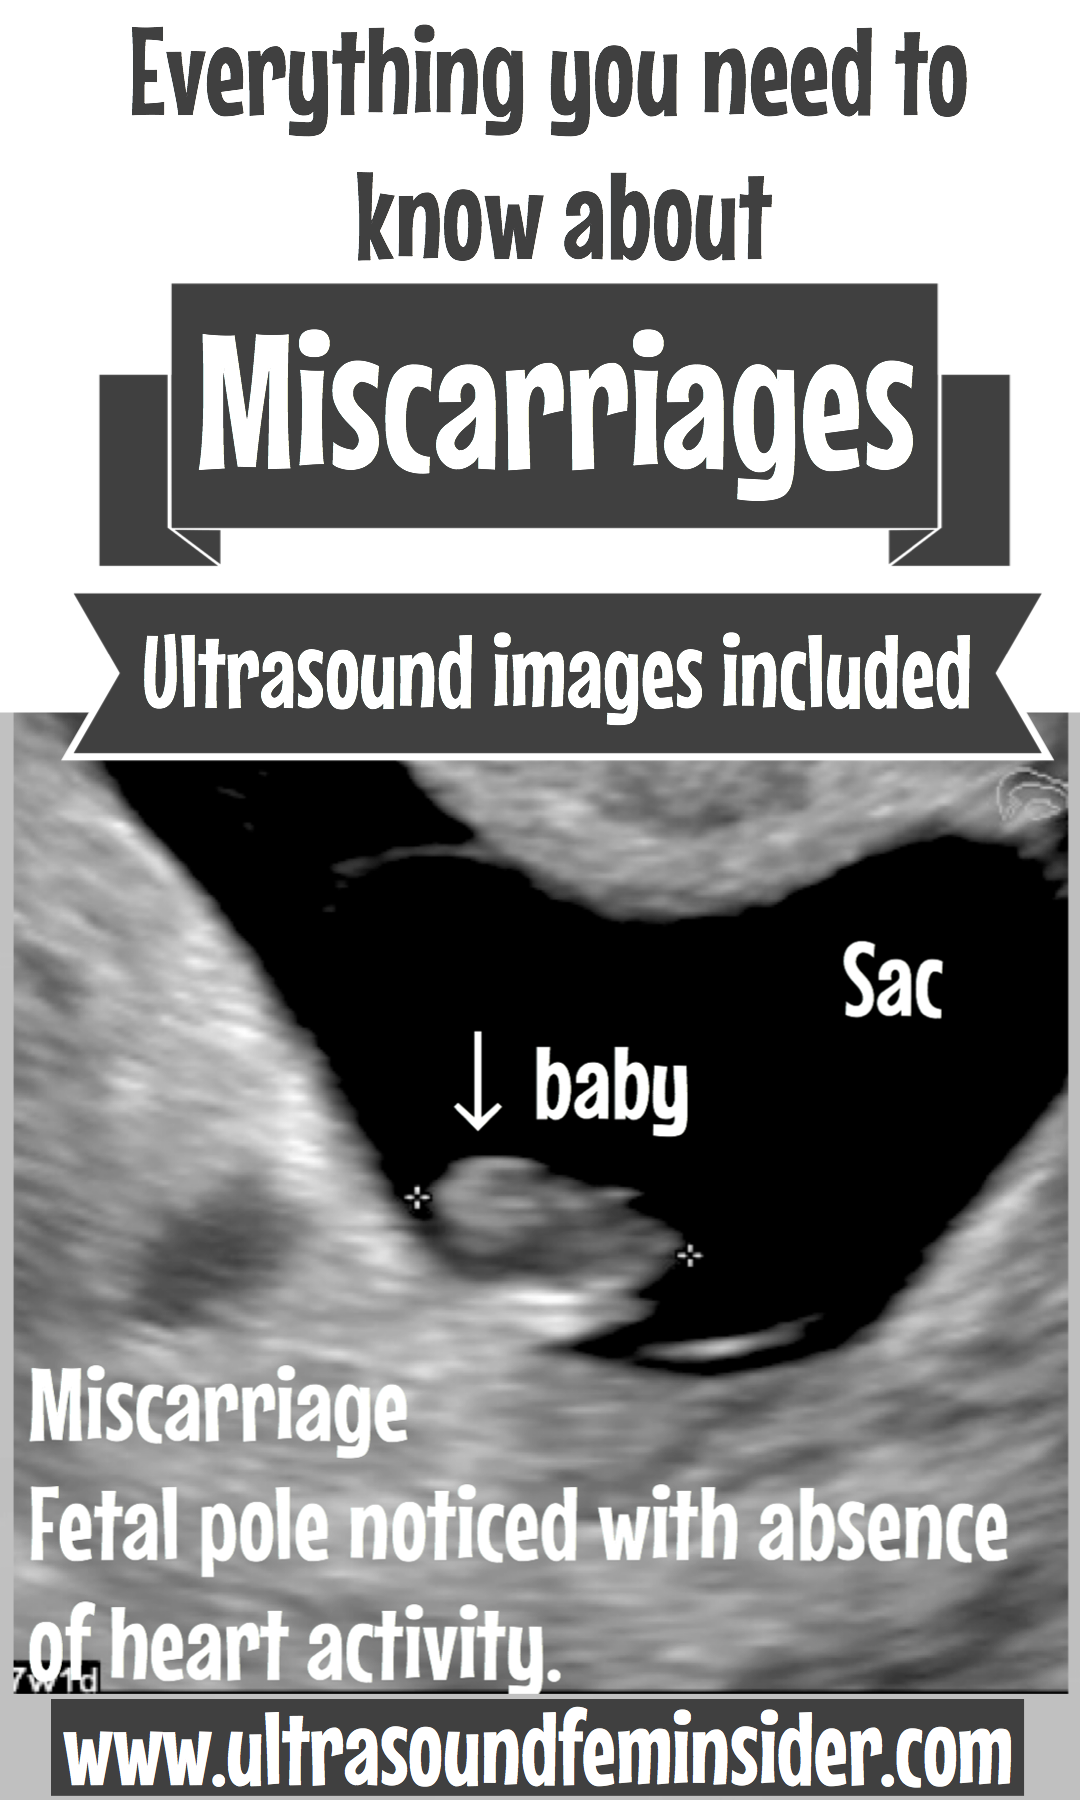 Miscarriage means loss of an embryo or fetus before the 20th week of pregnancy. Most miscarriages occur during the first 14 weeks of pregnancy. The medical term for miscarriage is spontaneous abortion.